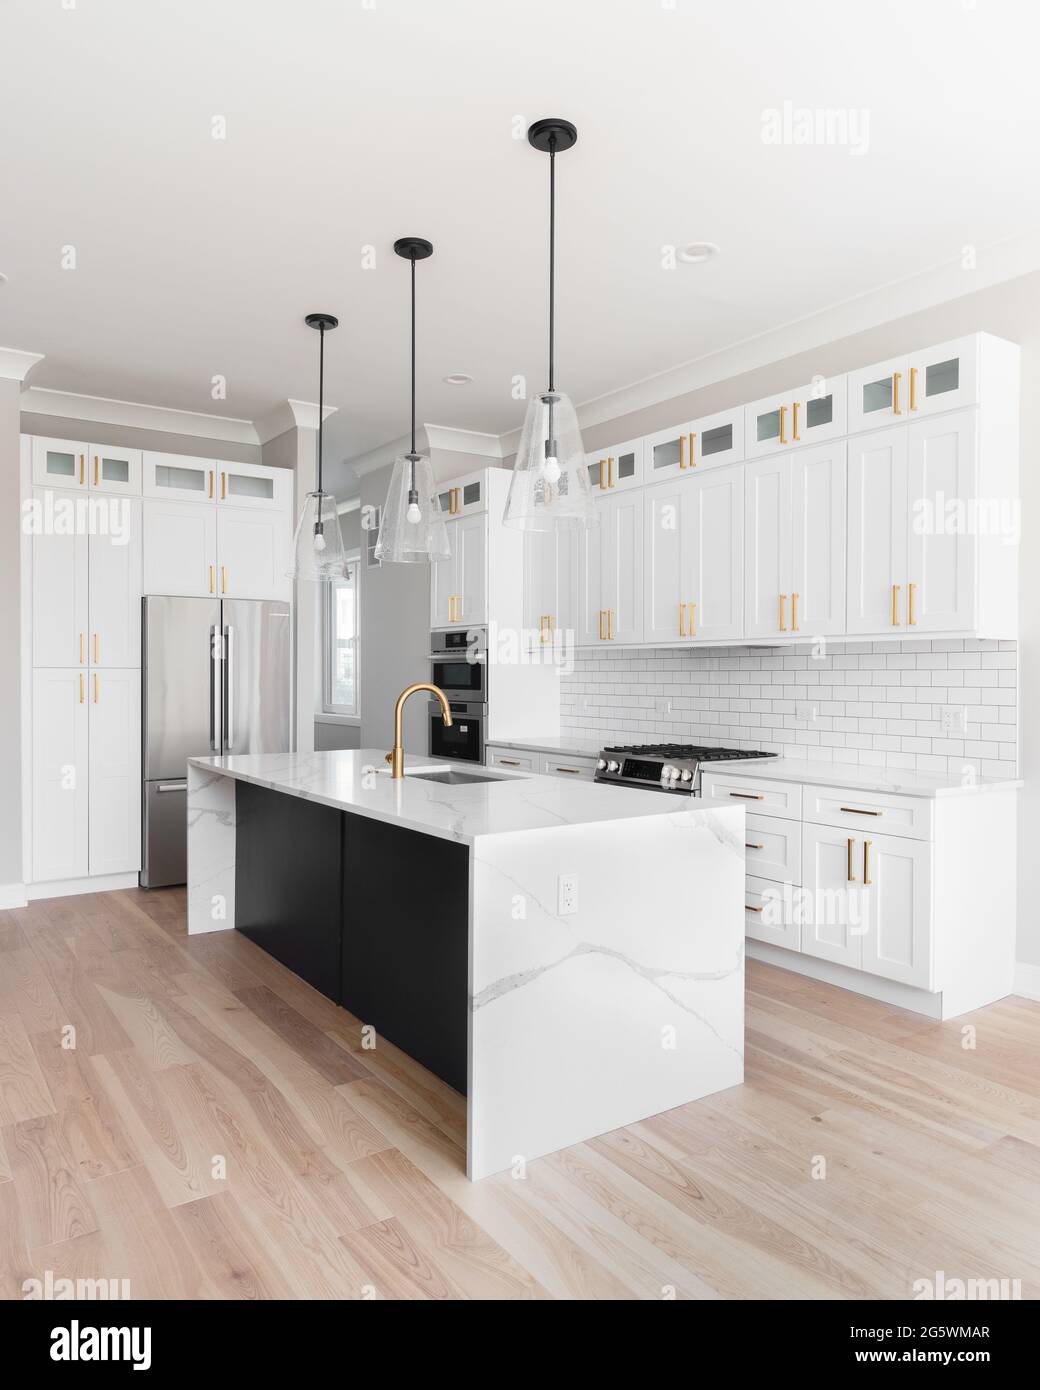 A luxury white kitchen with black pendant lights hanging above a waterfall granite island, stainless steel Bosch appliances, and gold hardware. Stock Photo